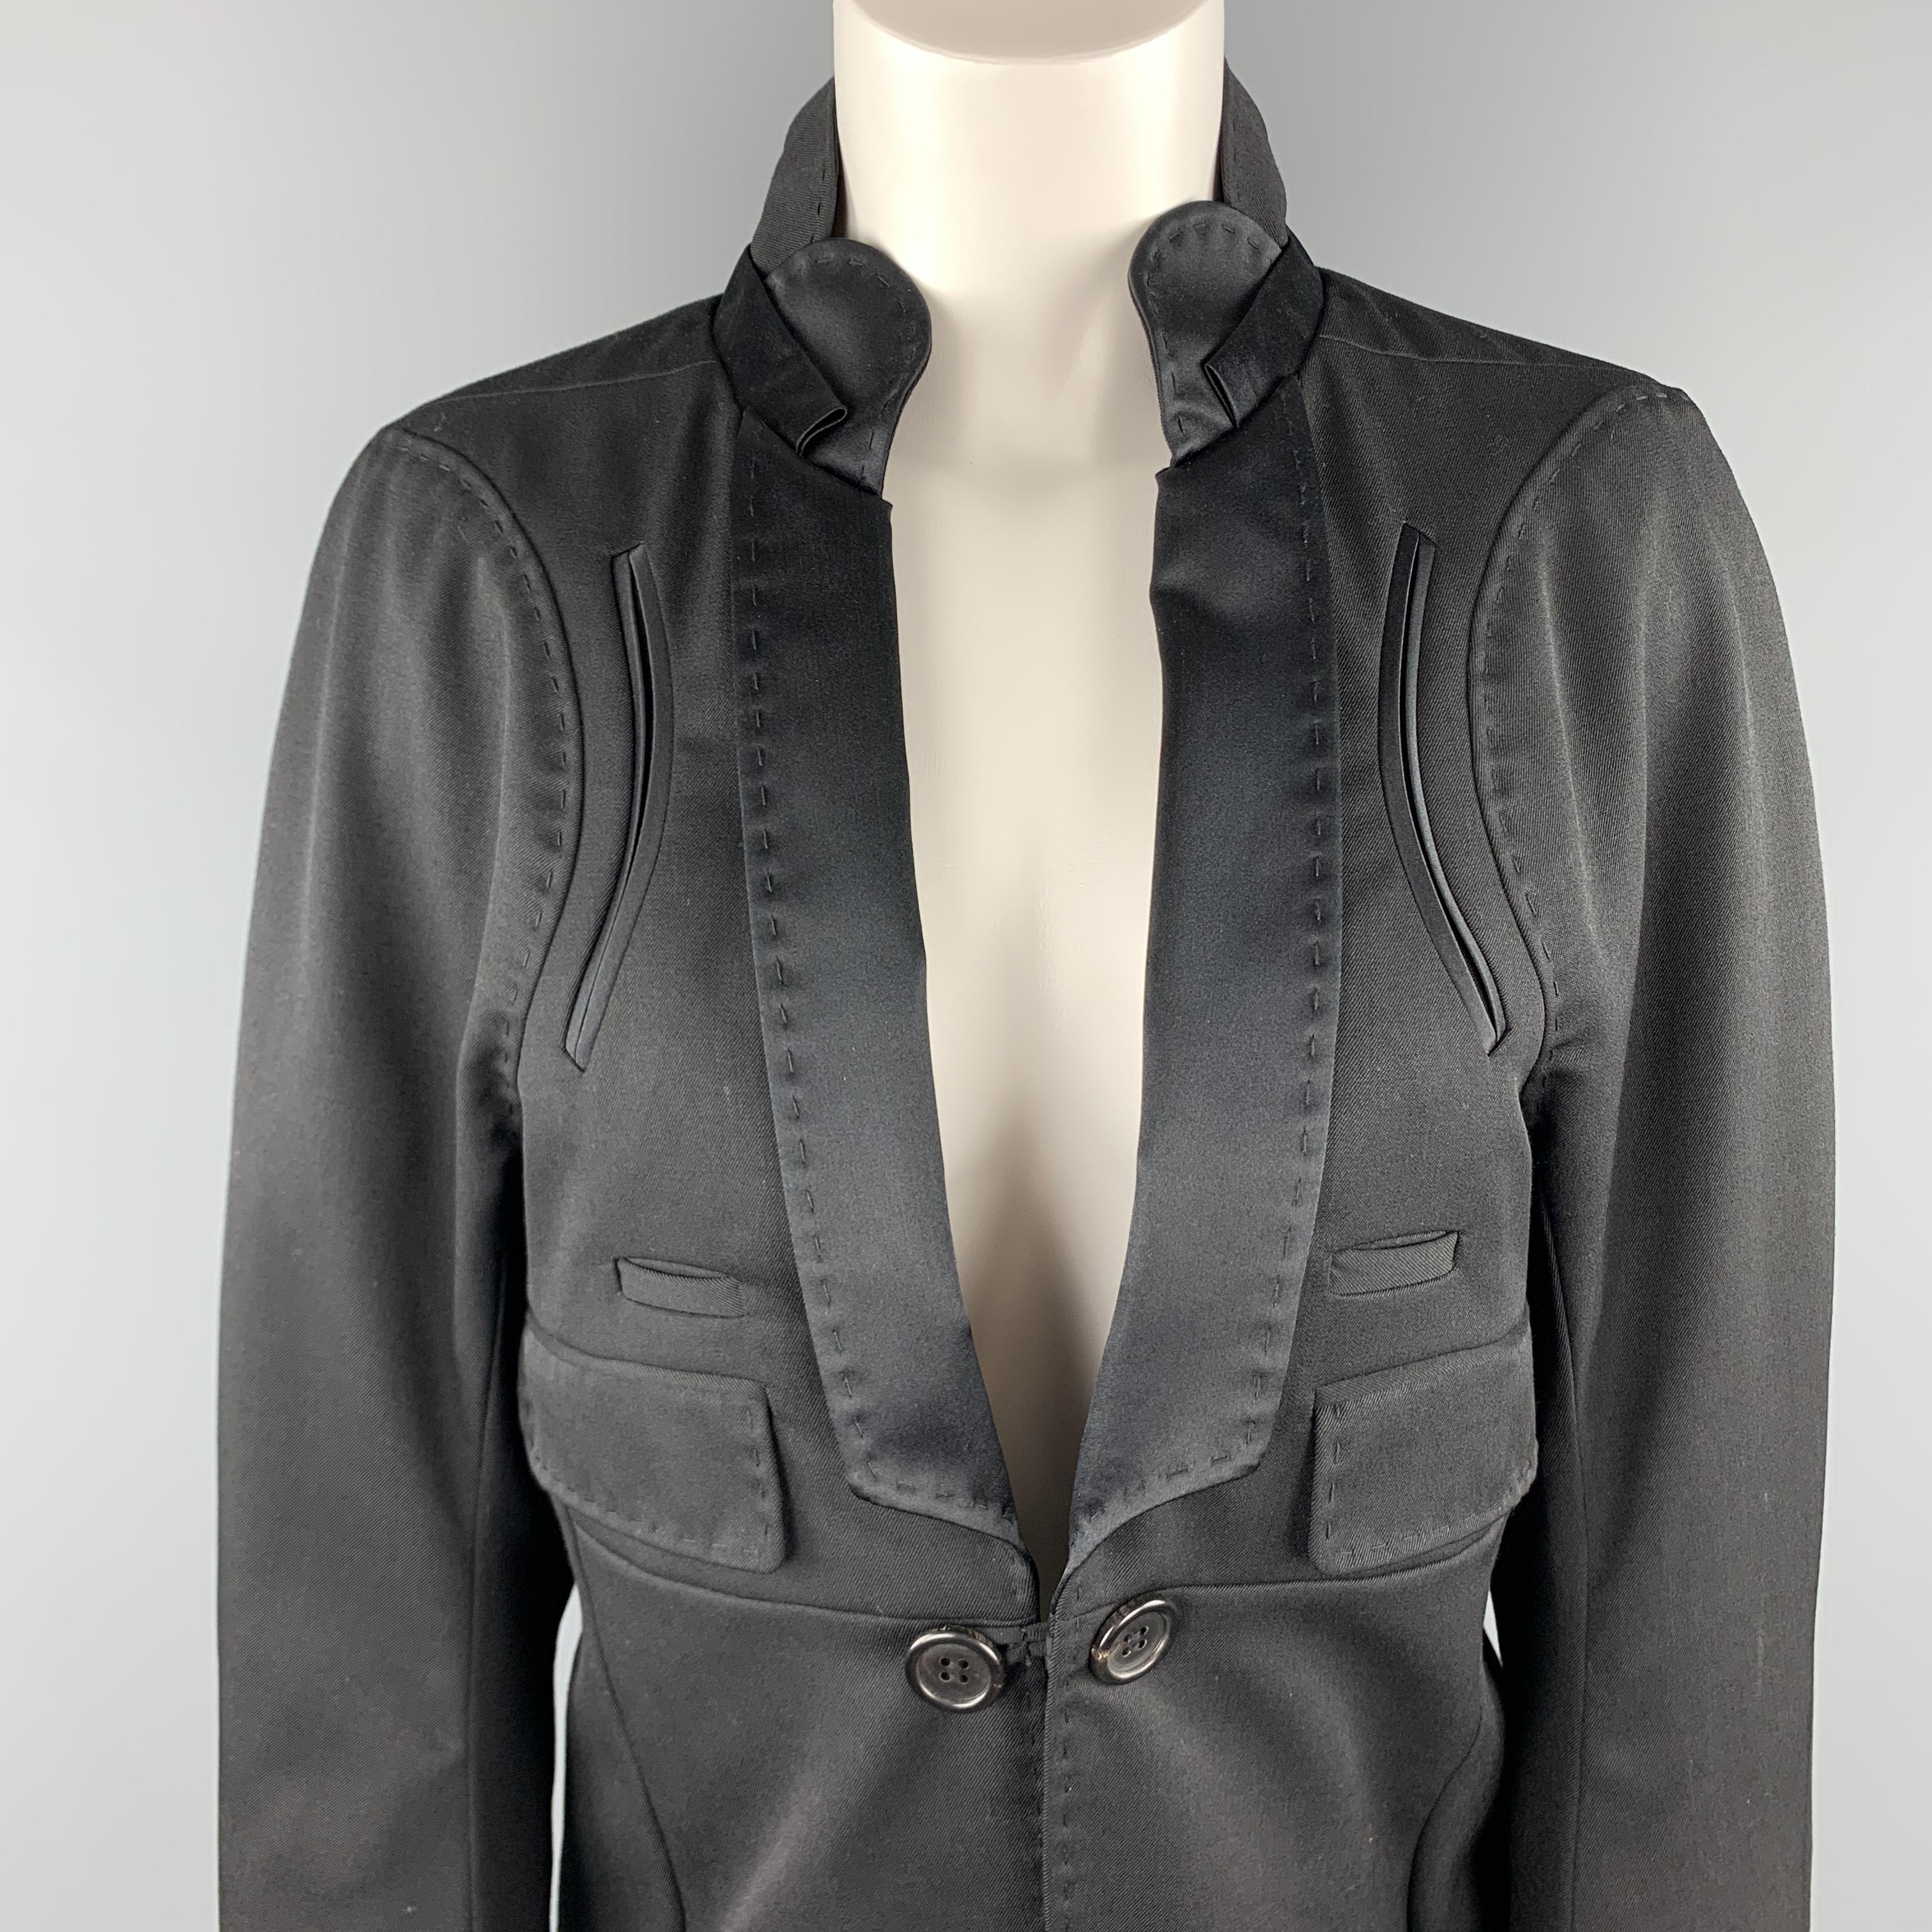 UNDERCOVER tuxedo style coat comes in black wool with a single button front, high back collar with satin shawl lapel, pocket details, and coat tail style hem line. Made in Japan.

Excellent Pre-Owned Condition.
Marked: JP 3

Measurements:

Shoulder: